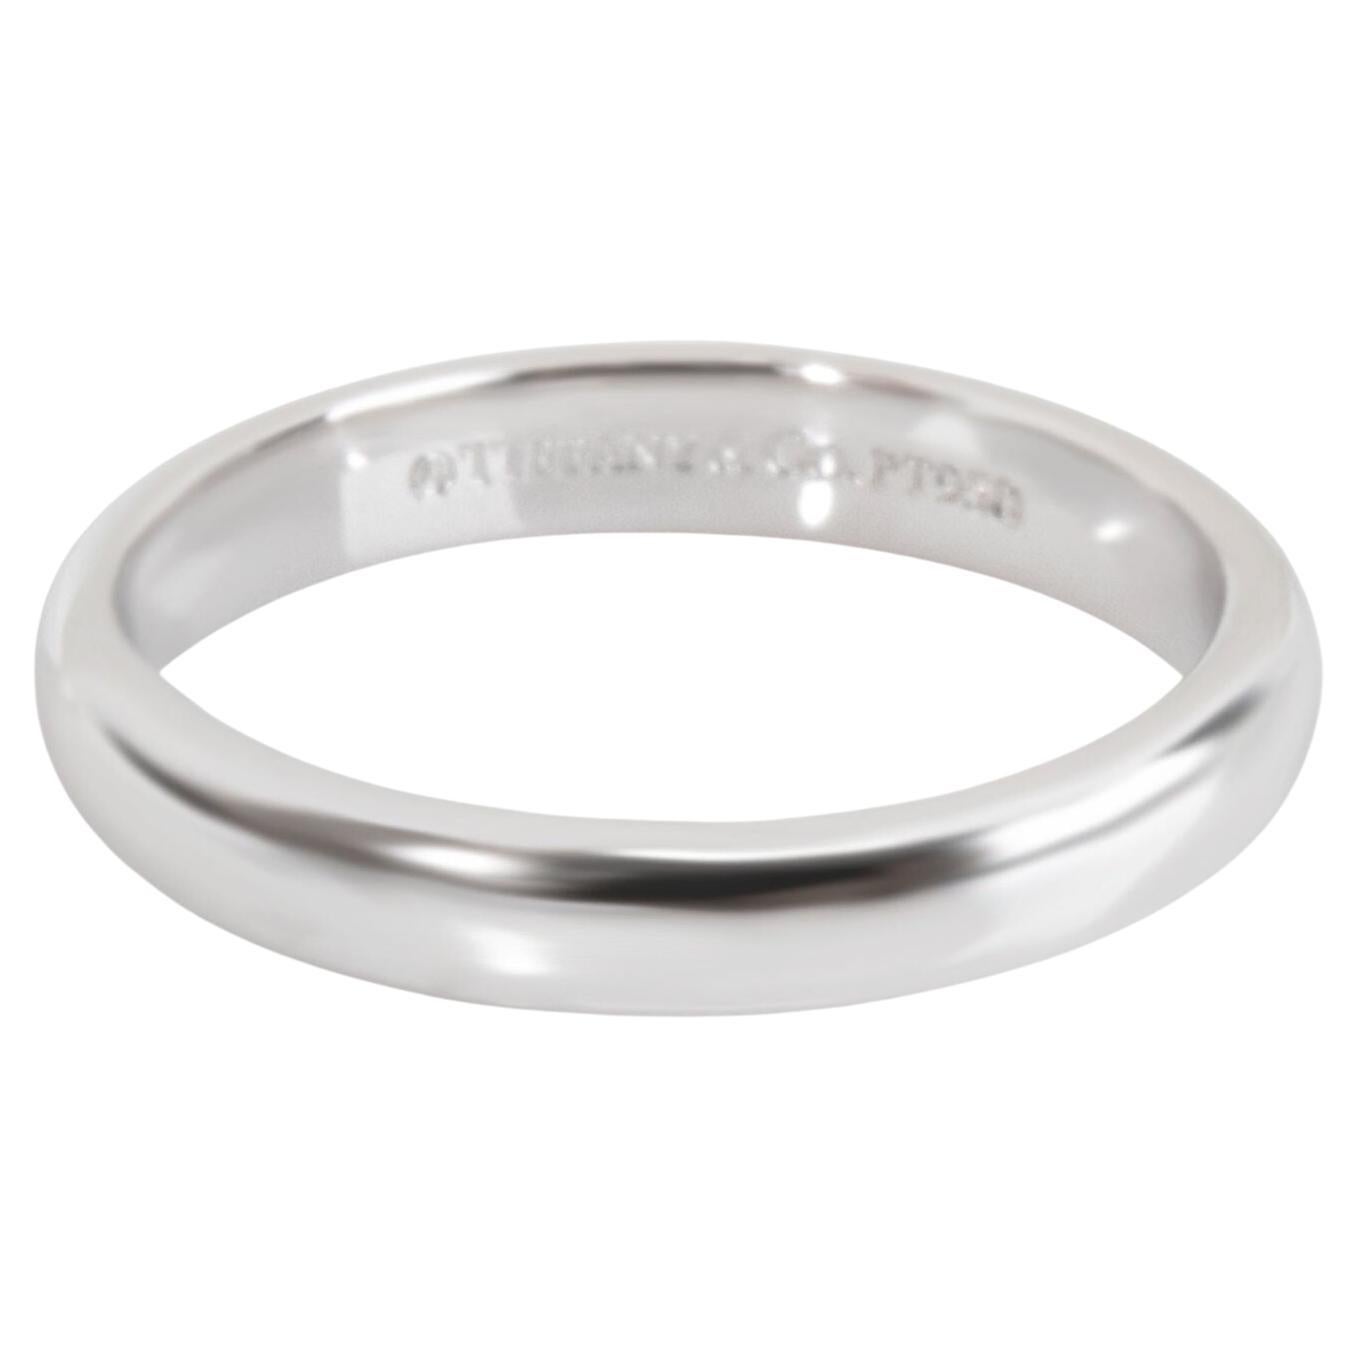 Tiffany & co platinum 950 3mm ring size 8.5 For Sale